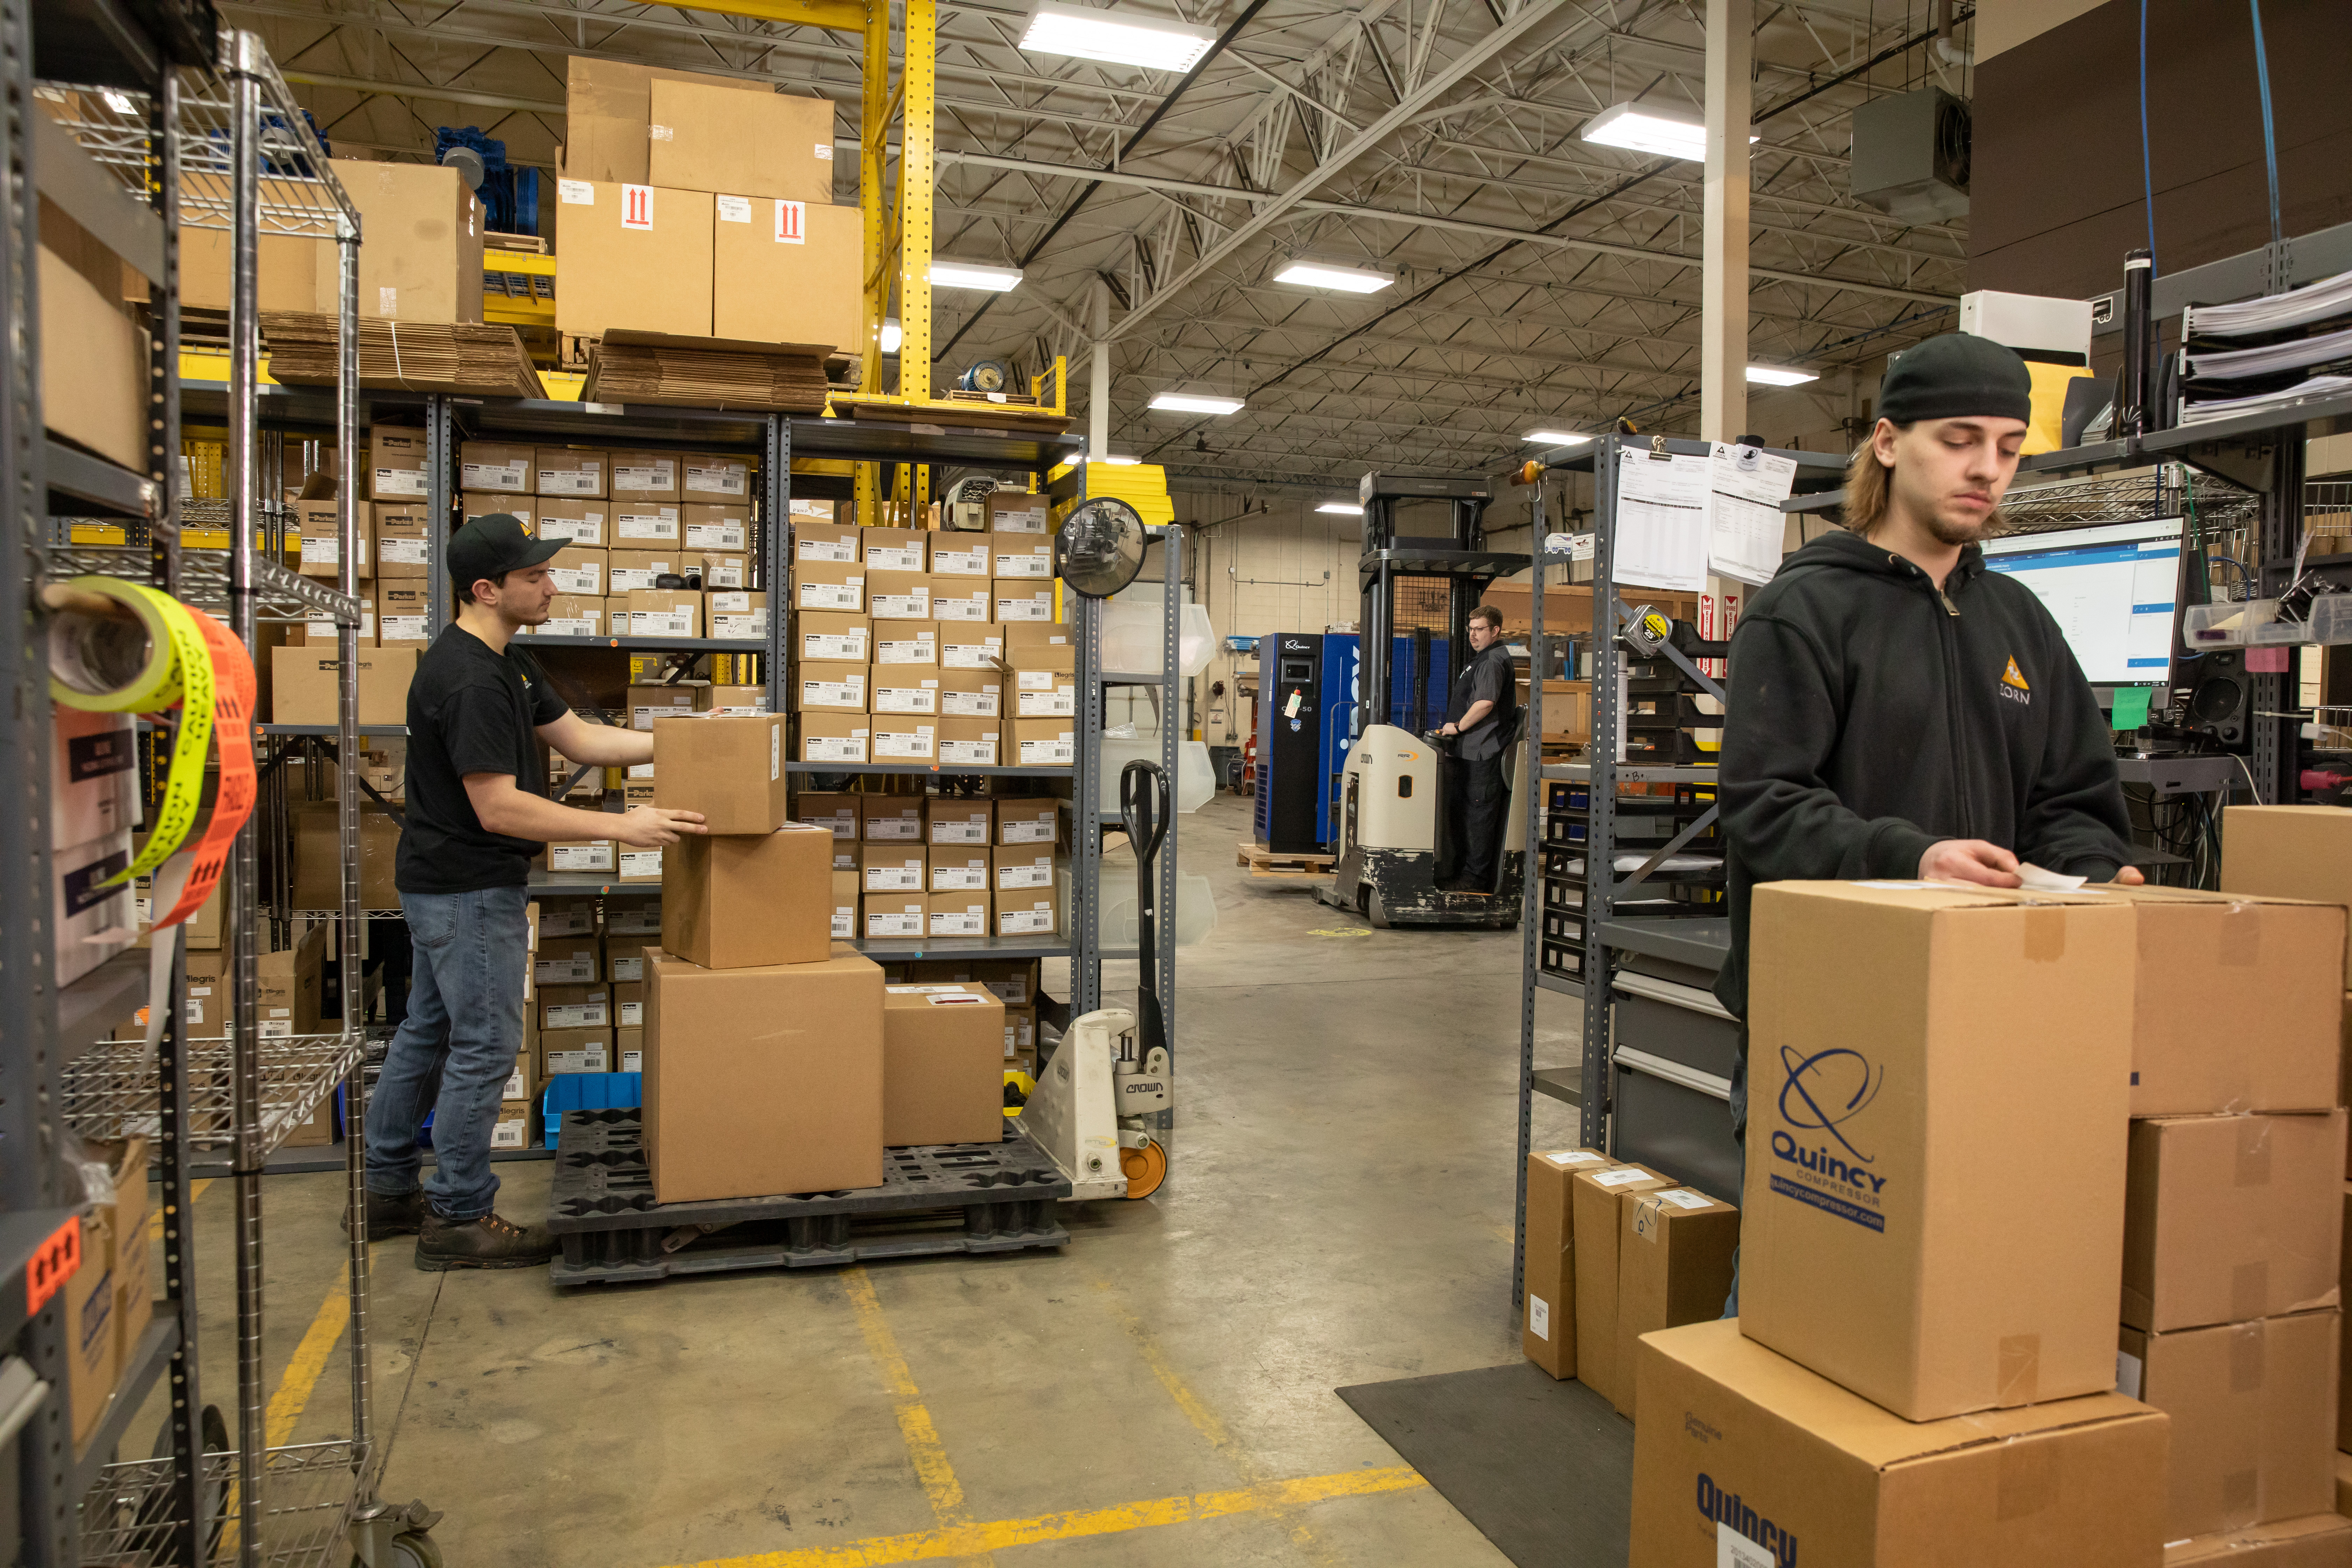 Employees Working in the Warehouse